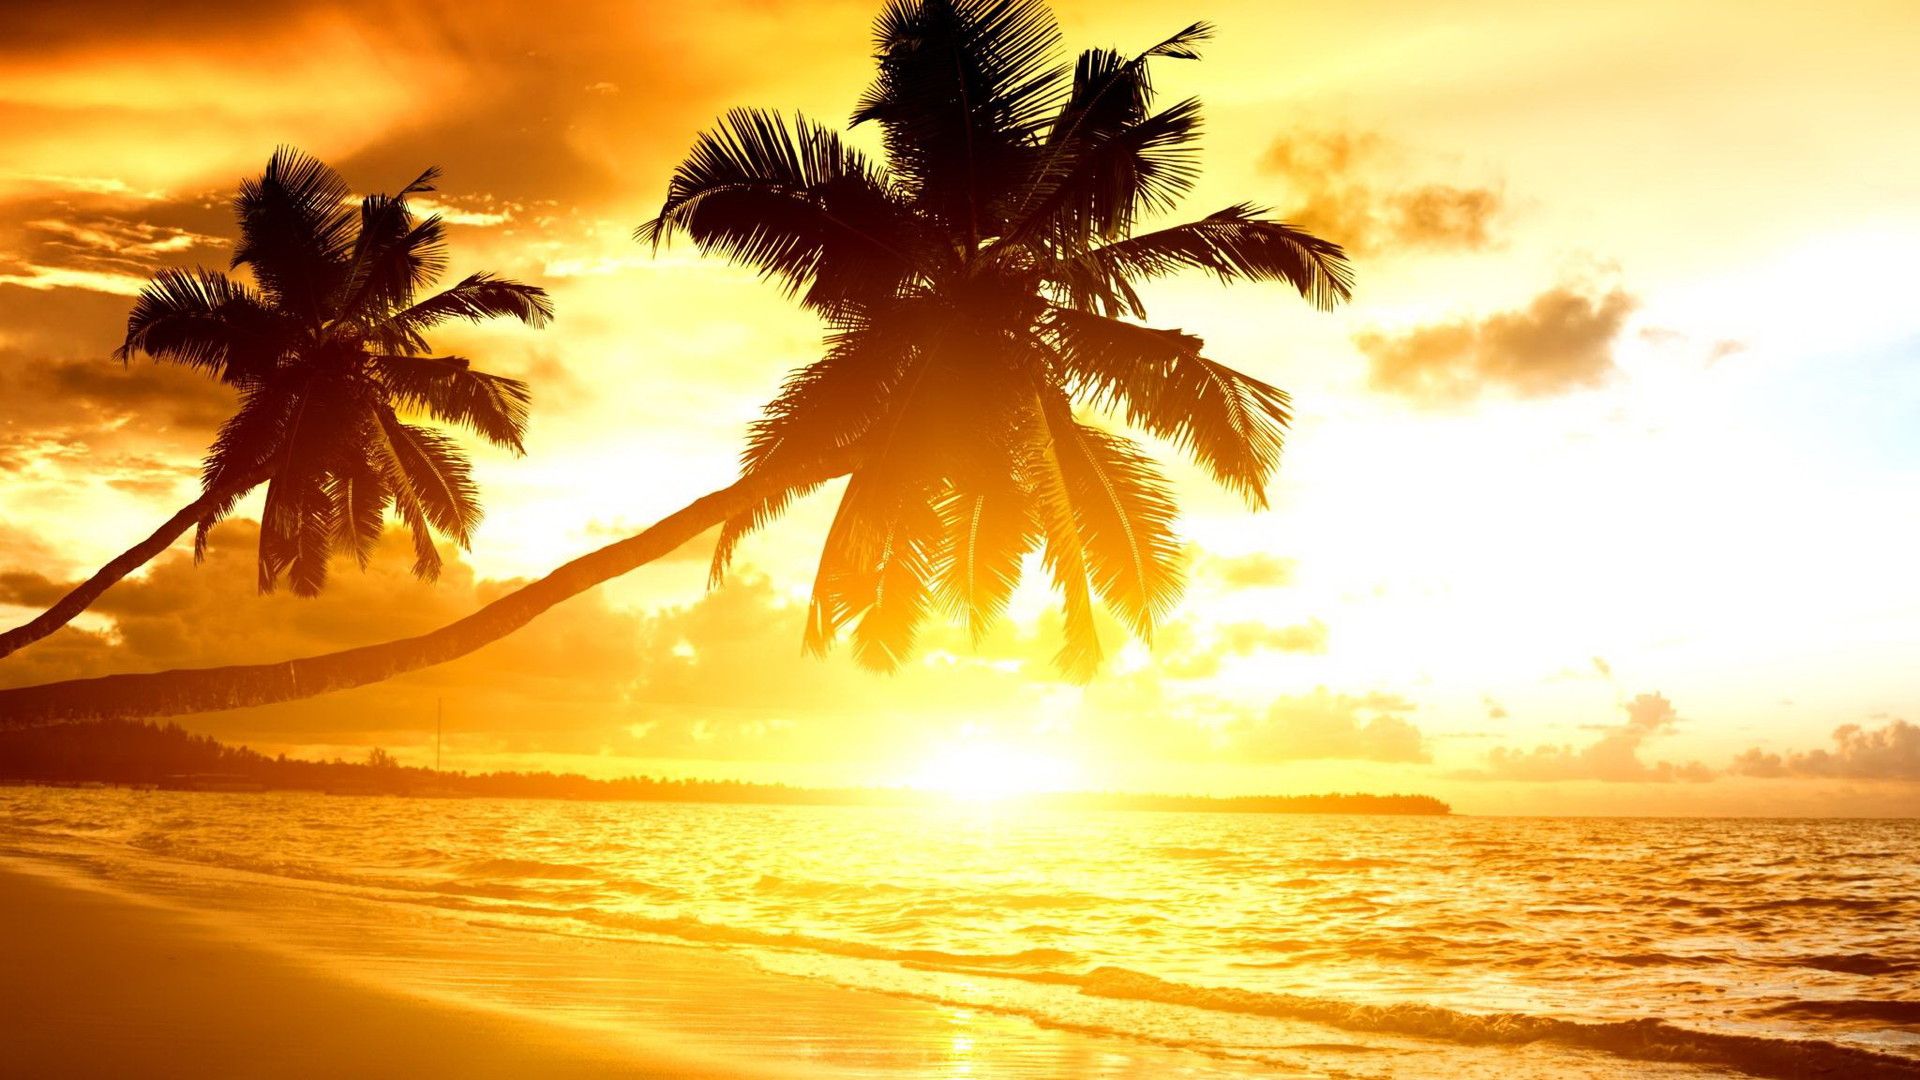 Bright Sunrise Wallpapers - 4k, HD Bright Sunrise Backgrounds on ...